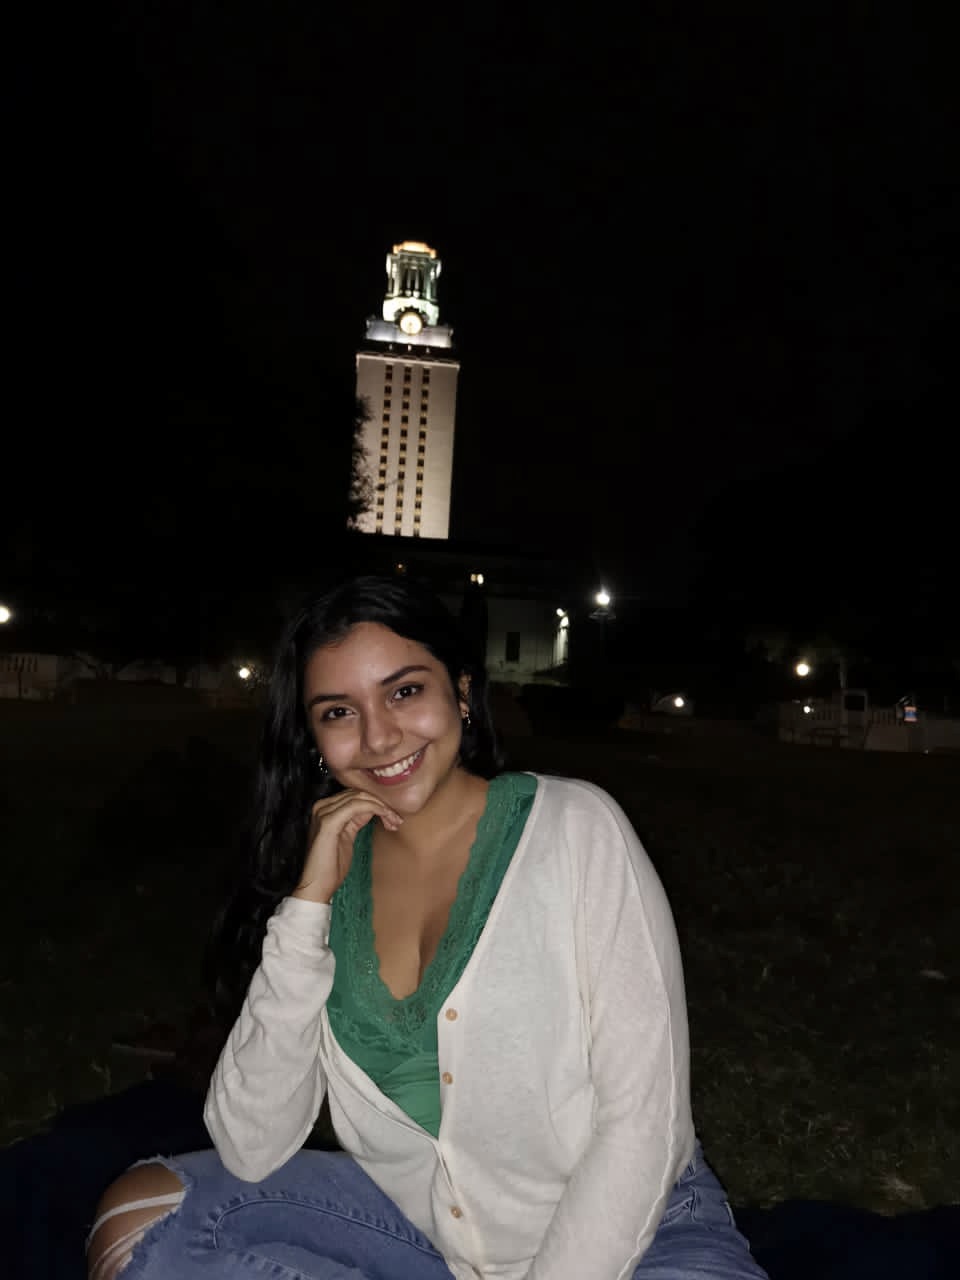 woman smiles near tower at night